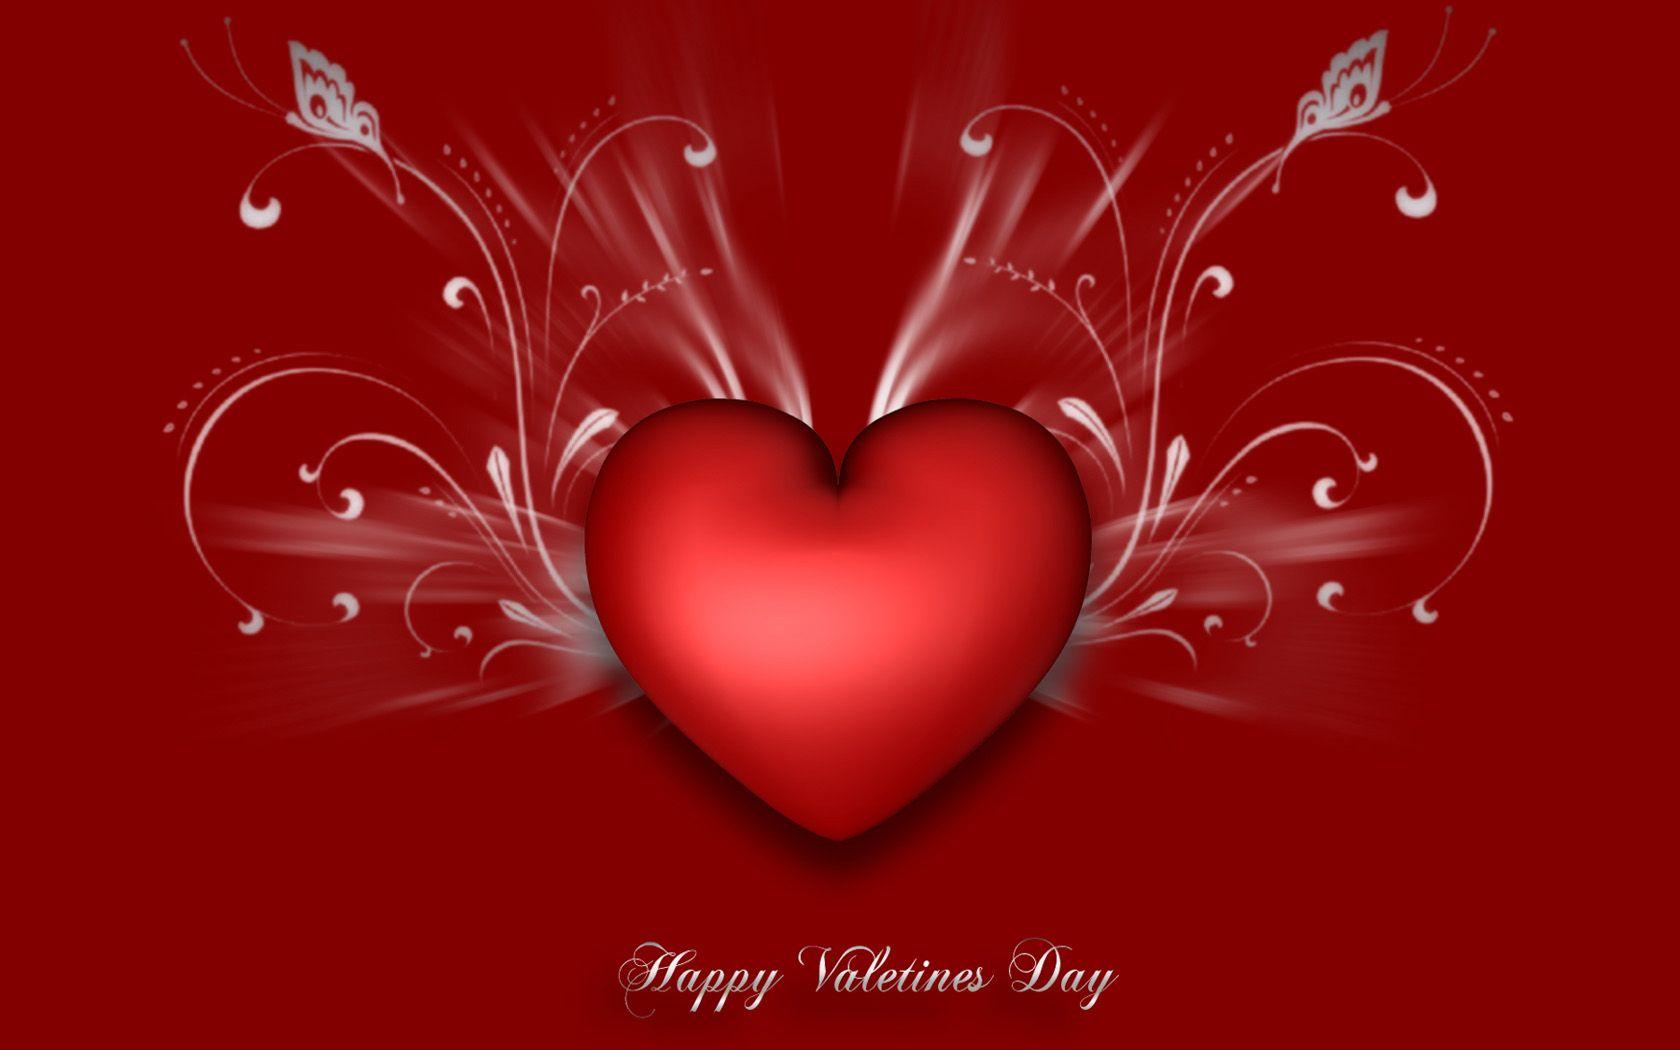 14 Feb Happy Valentines Day Wallpaper Full HD Special Love Images